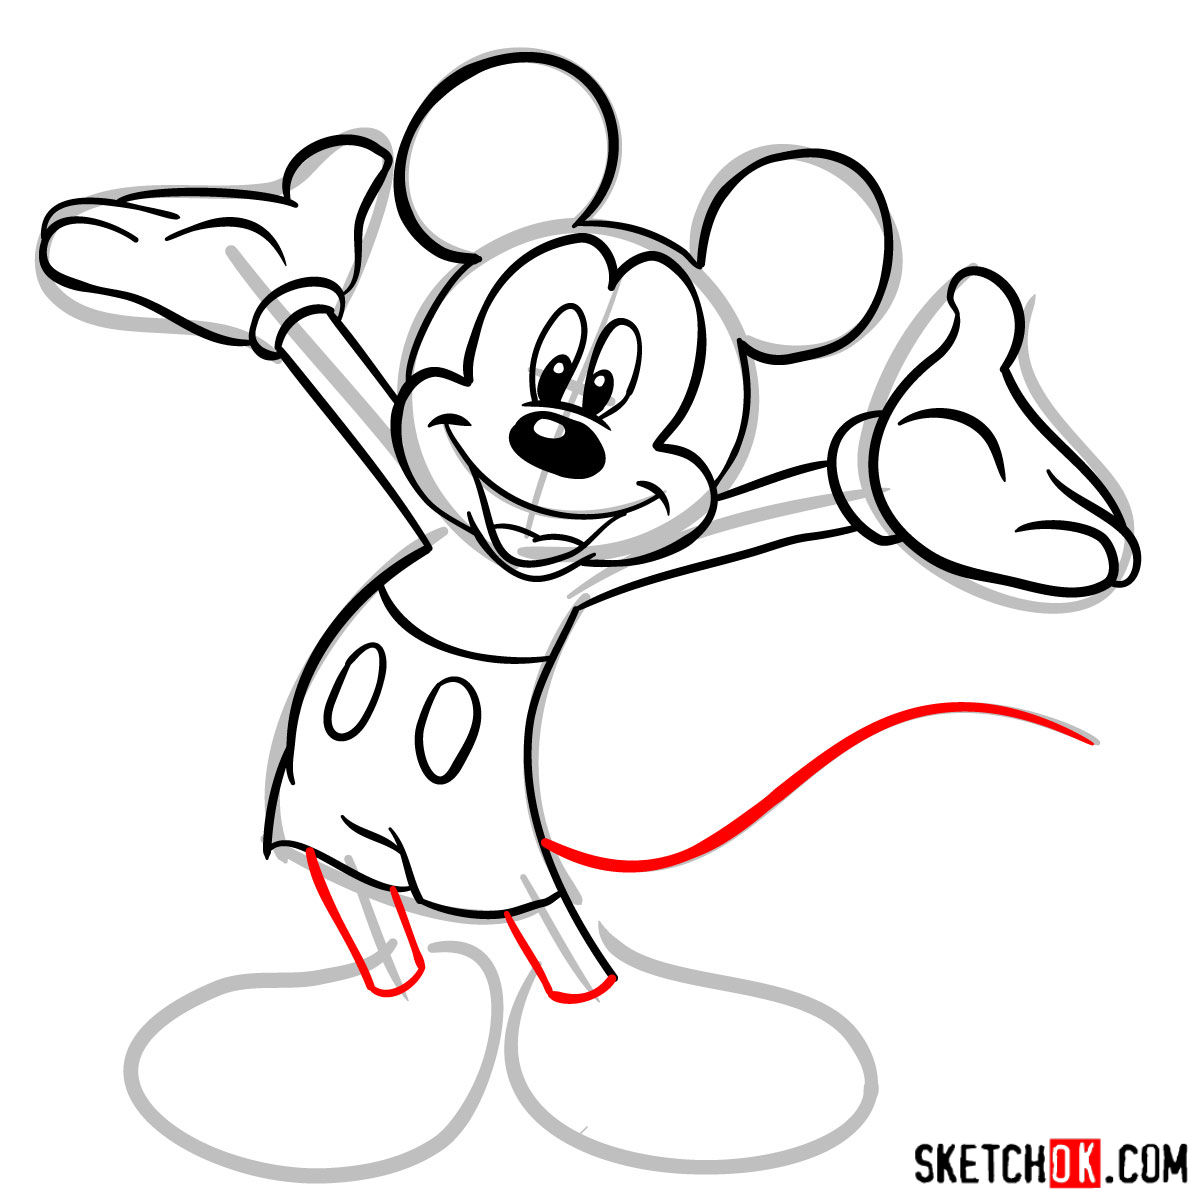 How to draw Mickey Mouse - step 09